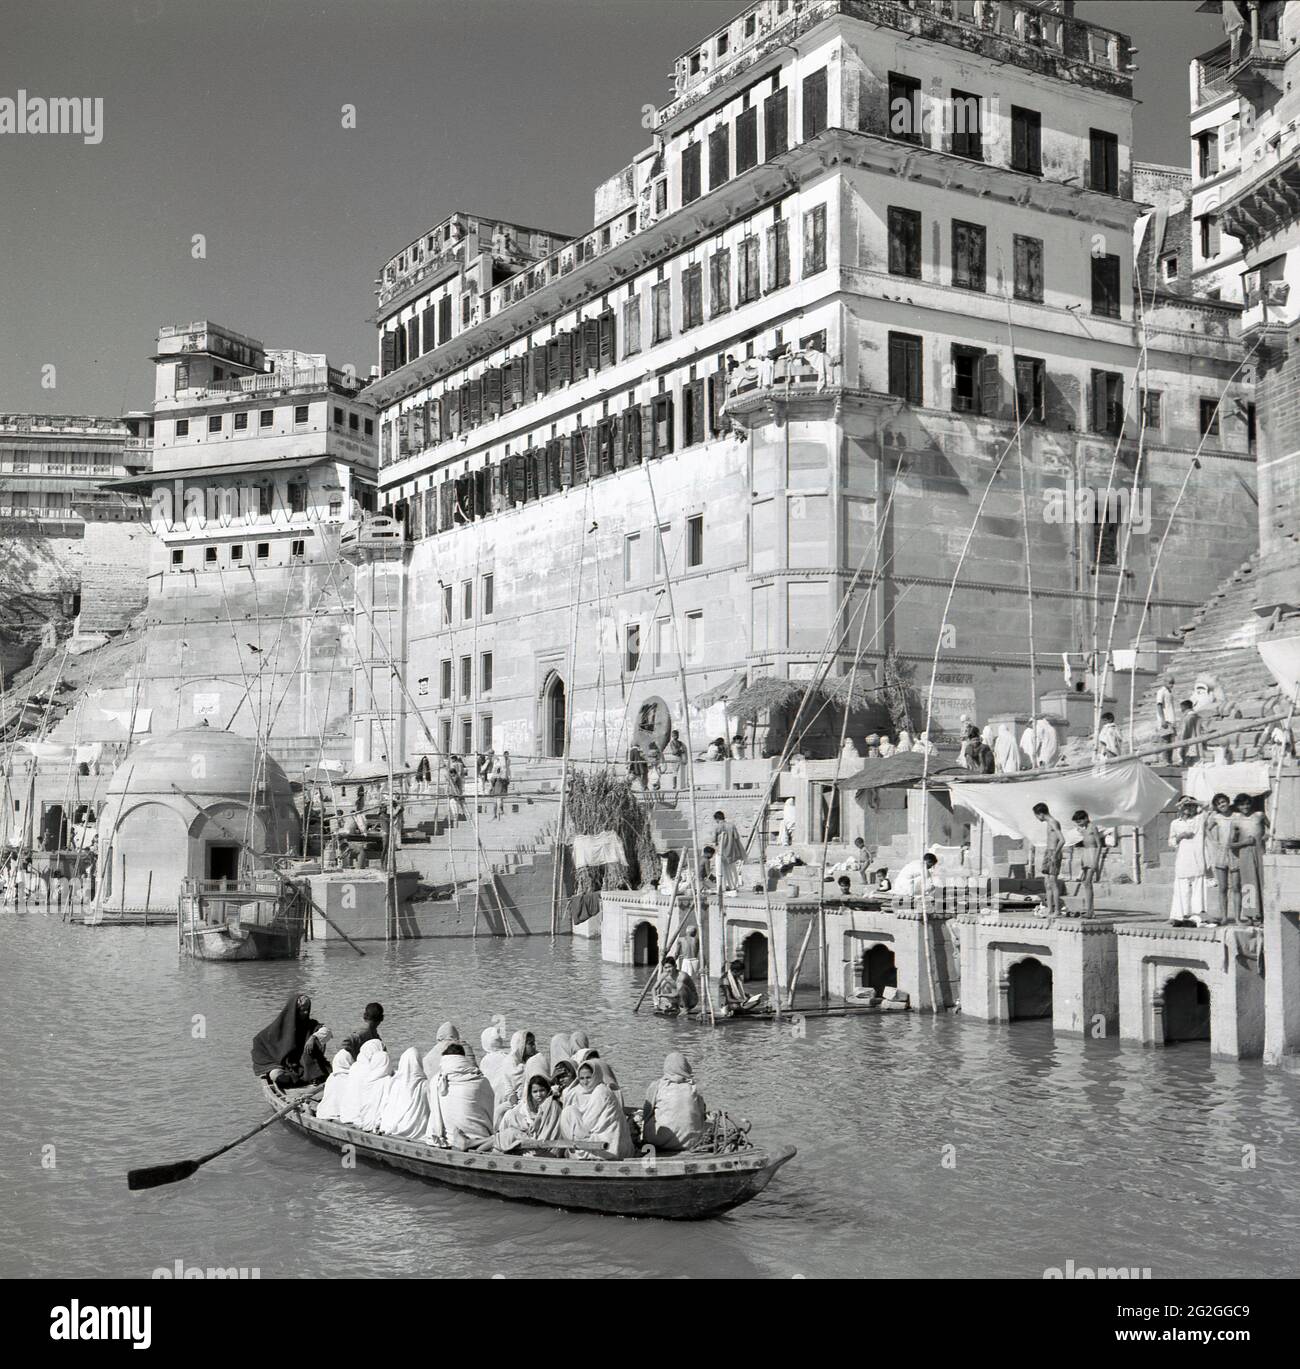 1950s, historical, indian people sitting in a rowing boat on the Ganges river, near the riverbank with its tall buildings in the city of Benares, India. One of the world's largest rivers, it is known as a 'holy river', as the indian people, the majority who are Hindu, consider it sacred and use its waters for religious rituals, many believing that bathing in the waters of the Ganges will cleanse their souls. The Ganges river is therefore an important place of Indian religious activity, culture and history. Stock Photo